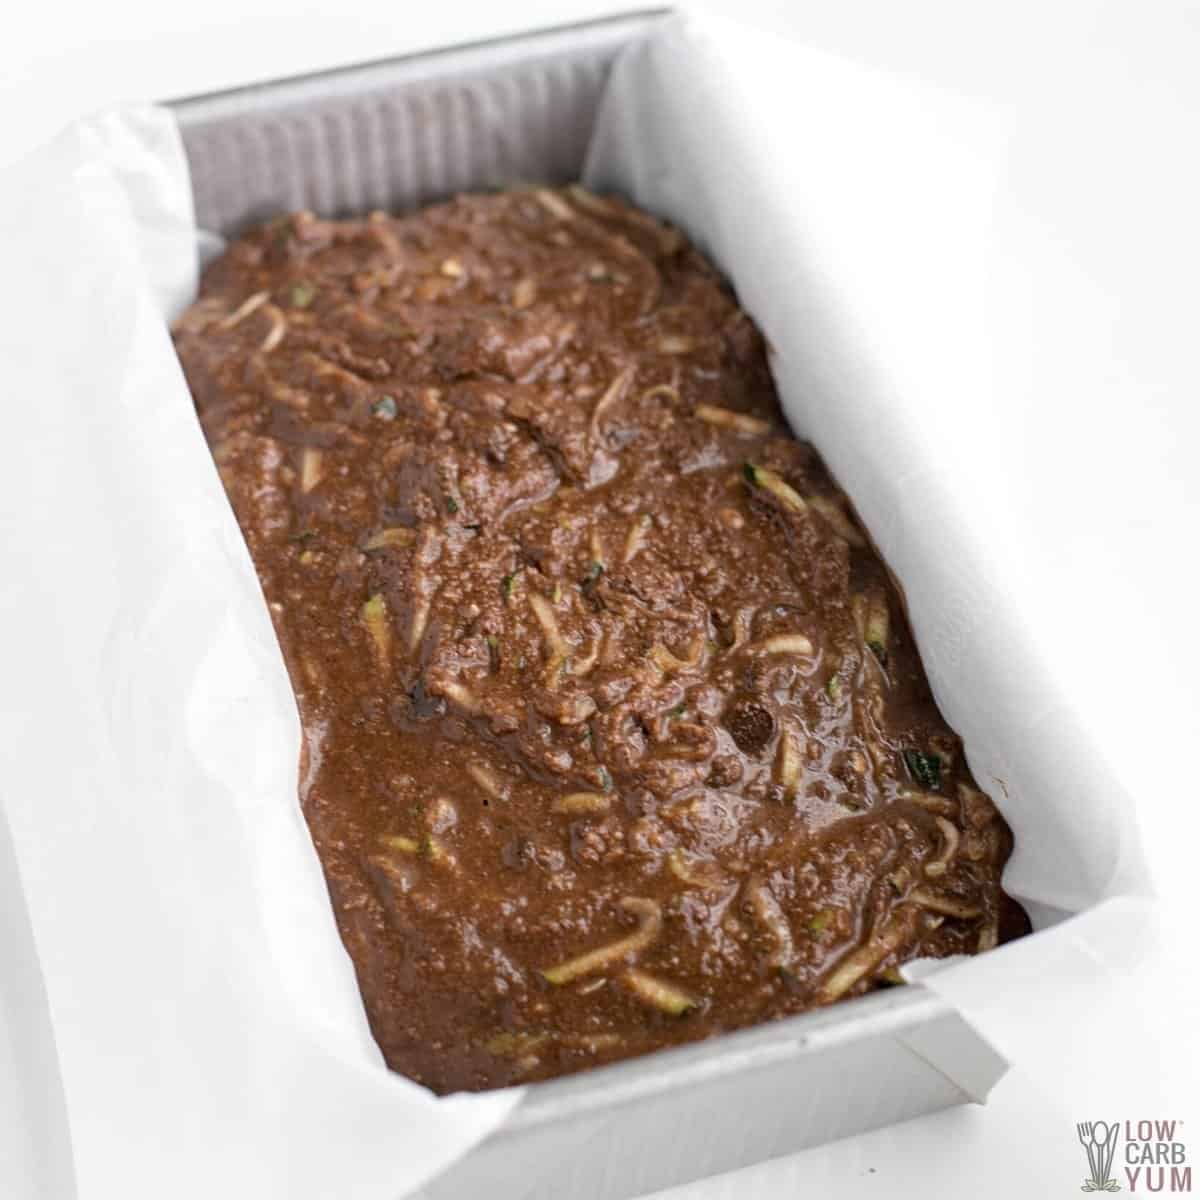 unbaked chocolate zucchini bread batter in lined loaf pan.